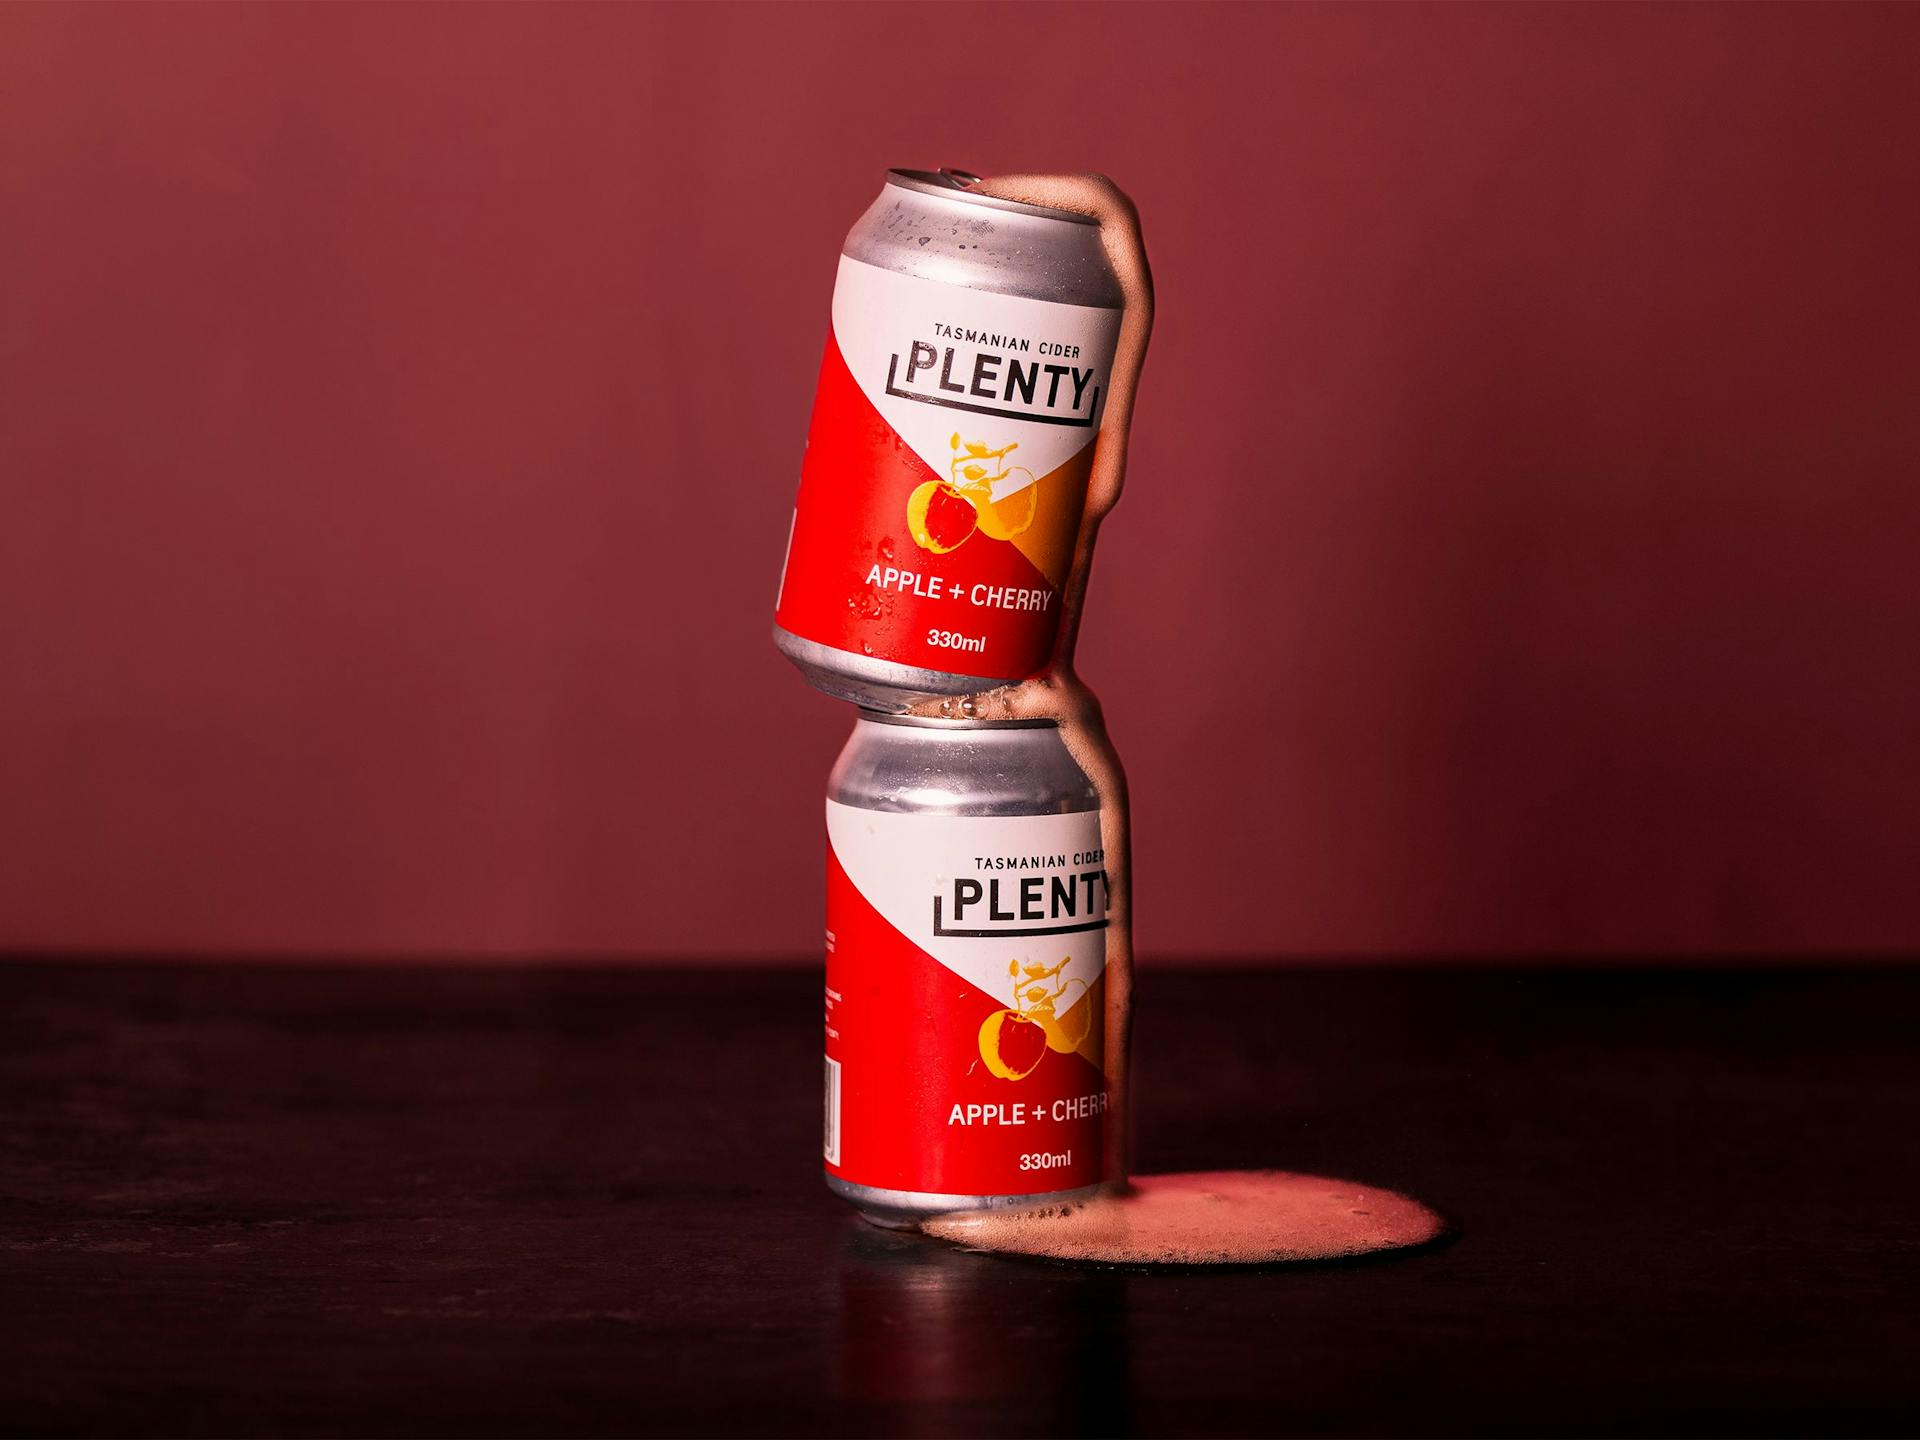 Two cans of Plenty Cider balance atop each other, overflowing with foam